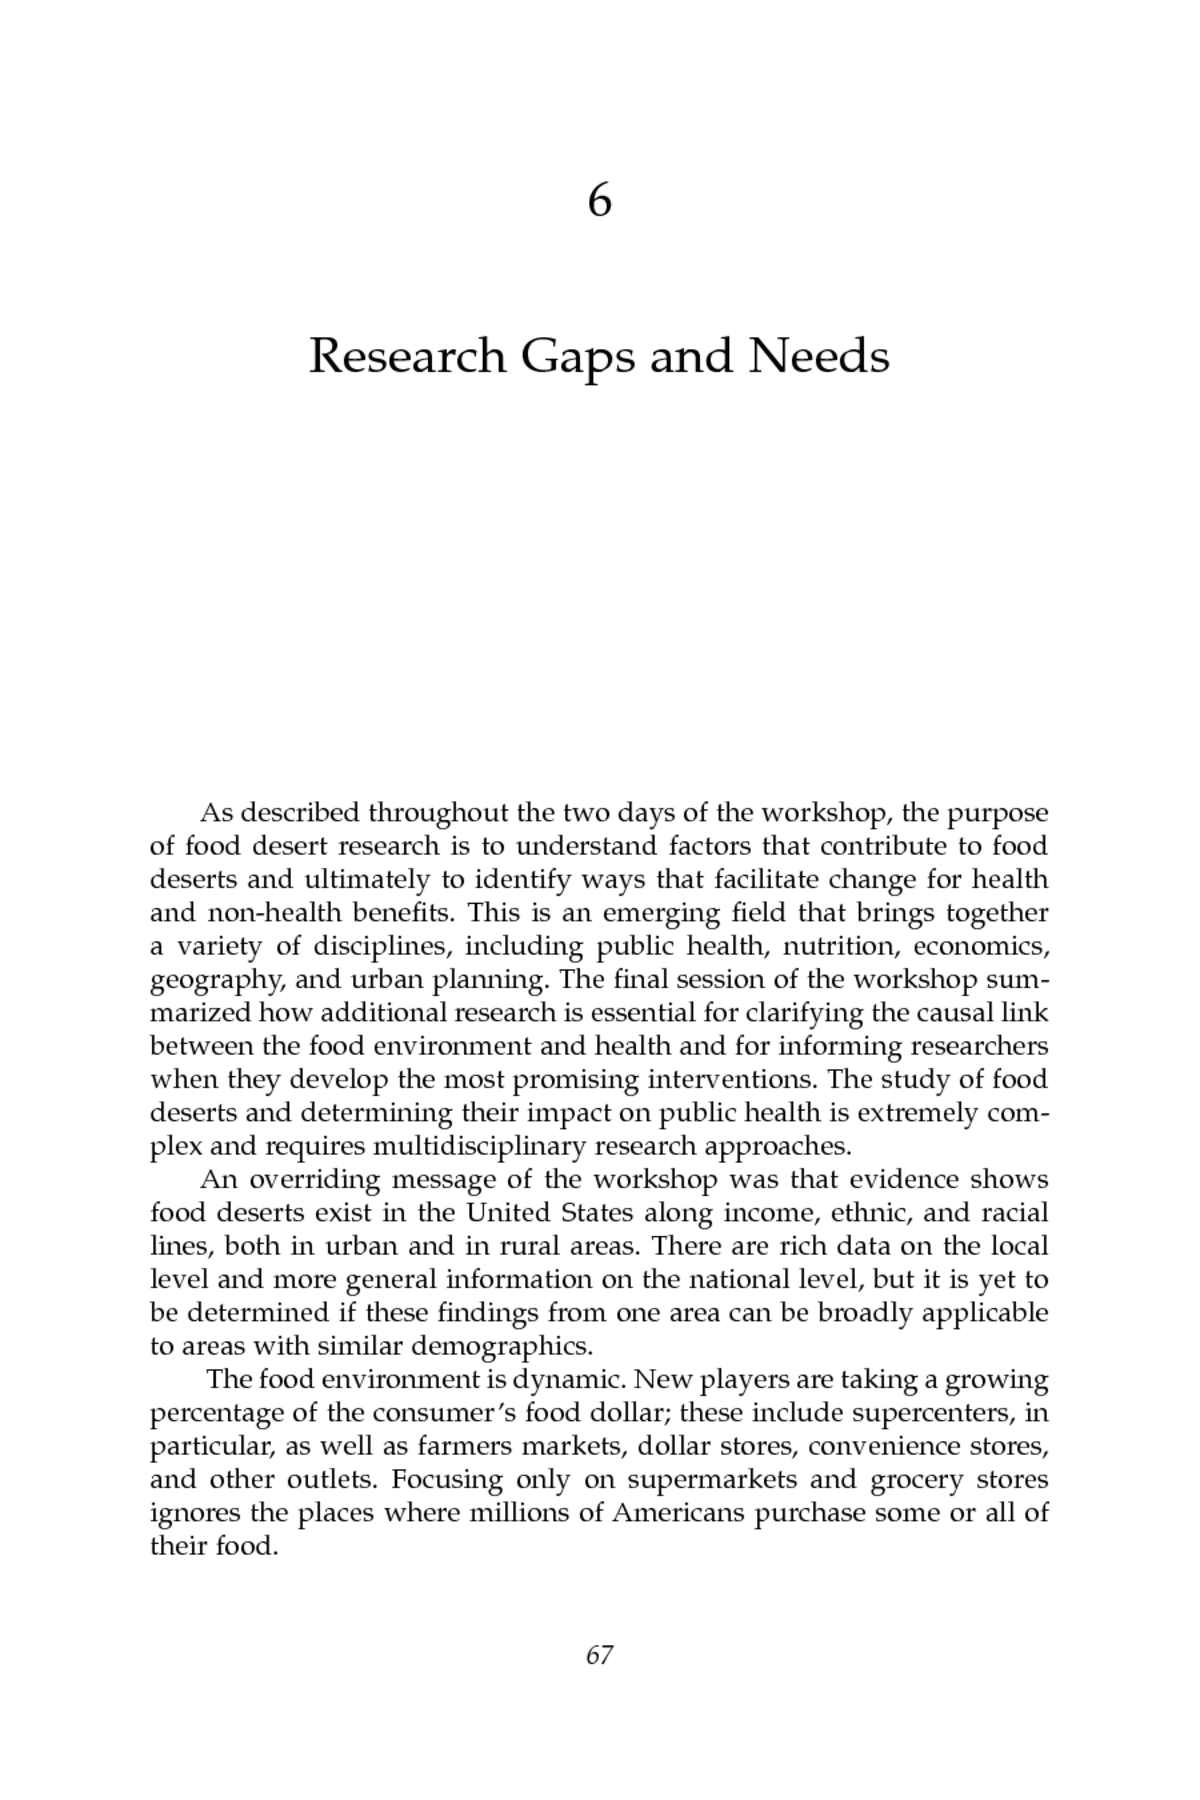 how to write about a research gap